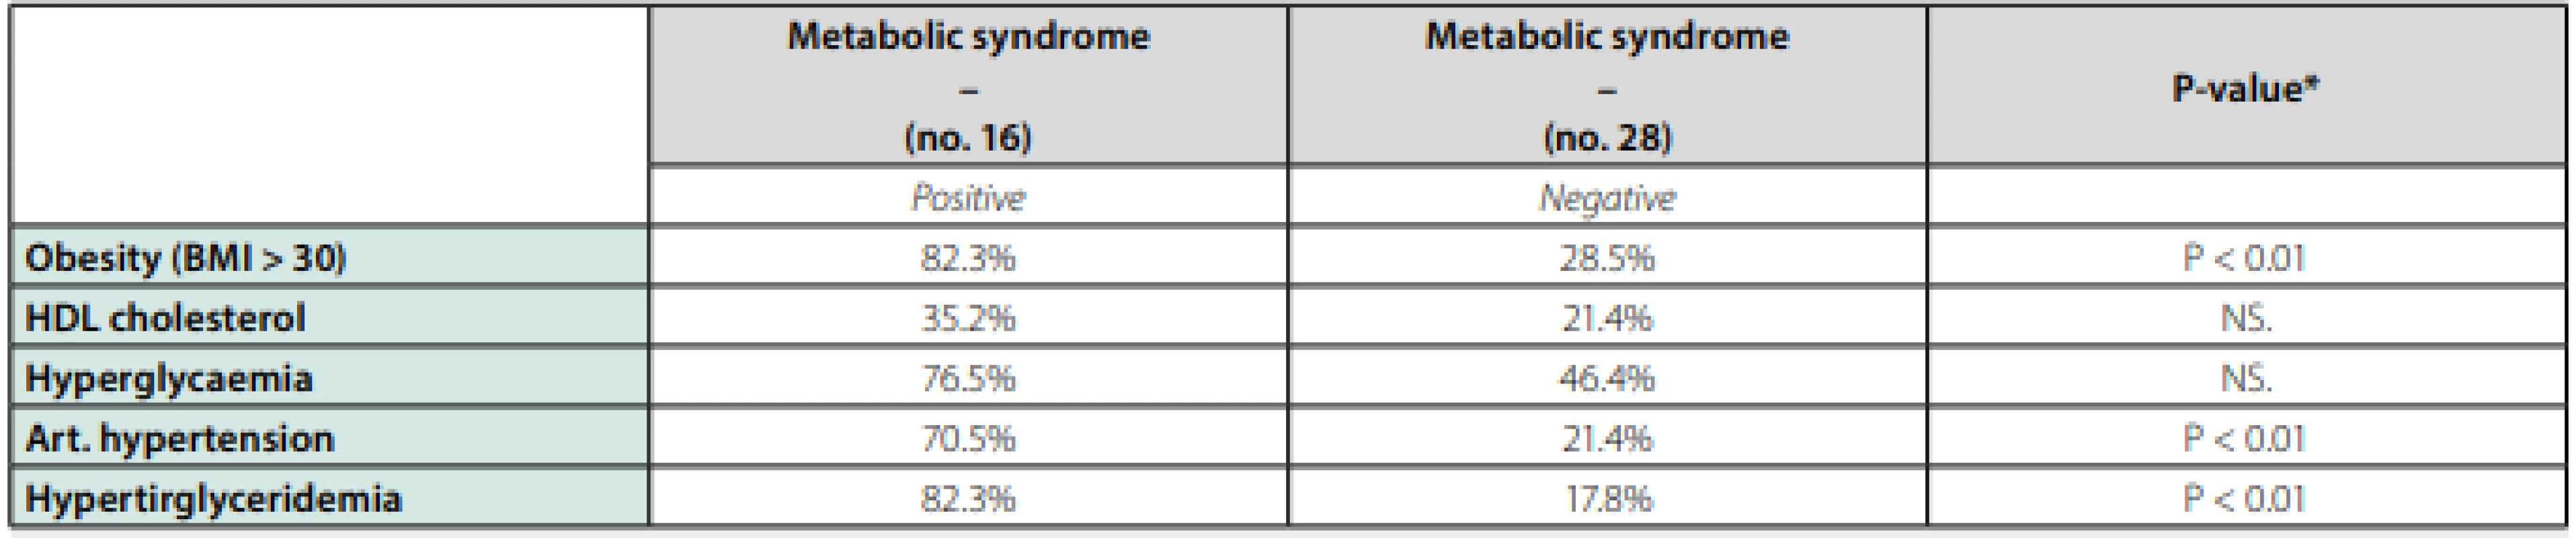 Comparison of patients with and without metabolic syndrome